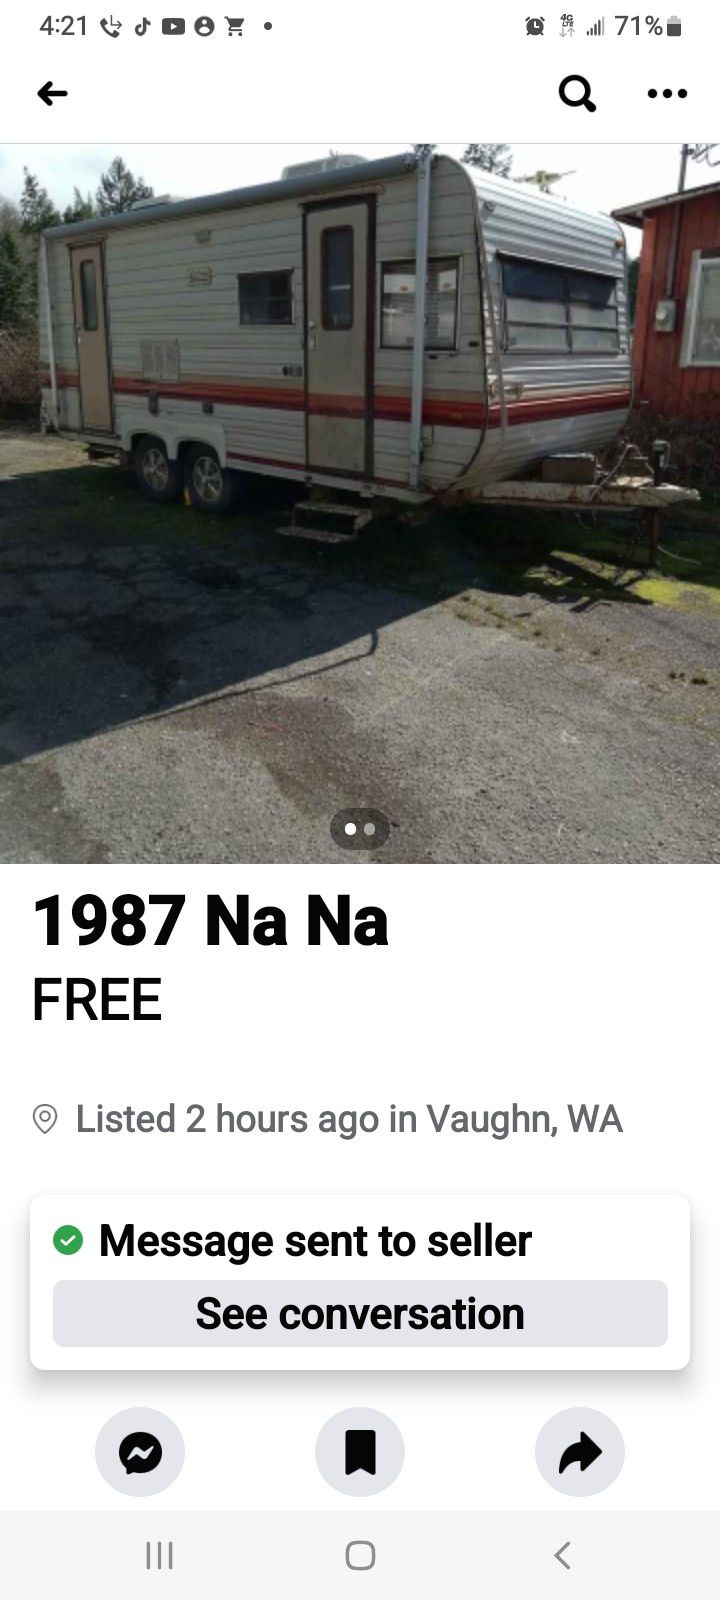 1987 travel trailer for sale